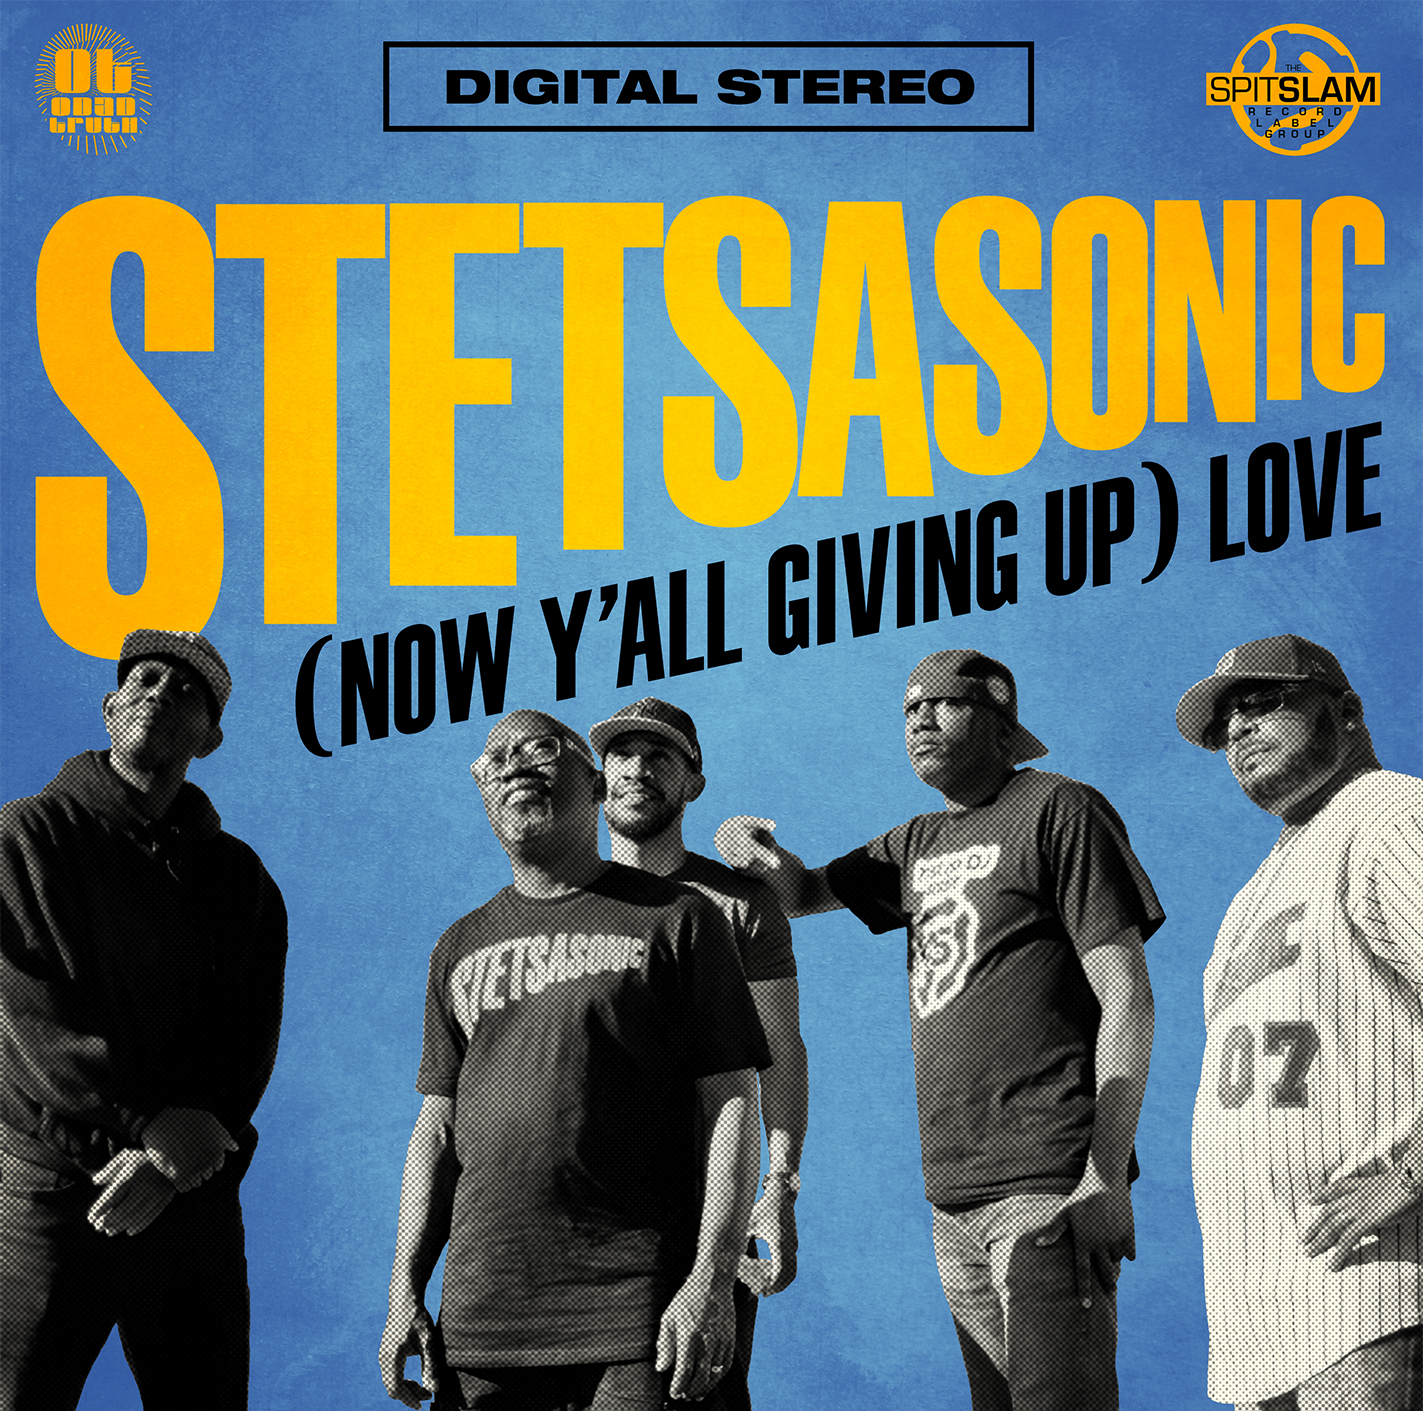 Art for (Now Y'all Givin Up) Love (C-Doc Remixx) by Stetsasonic